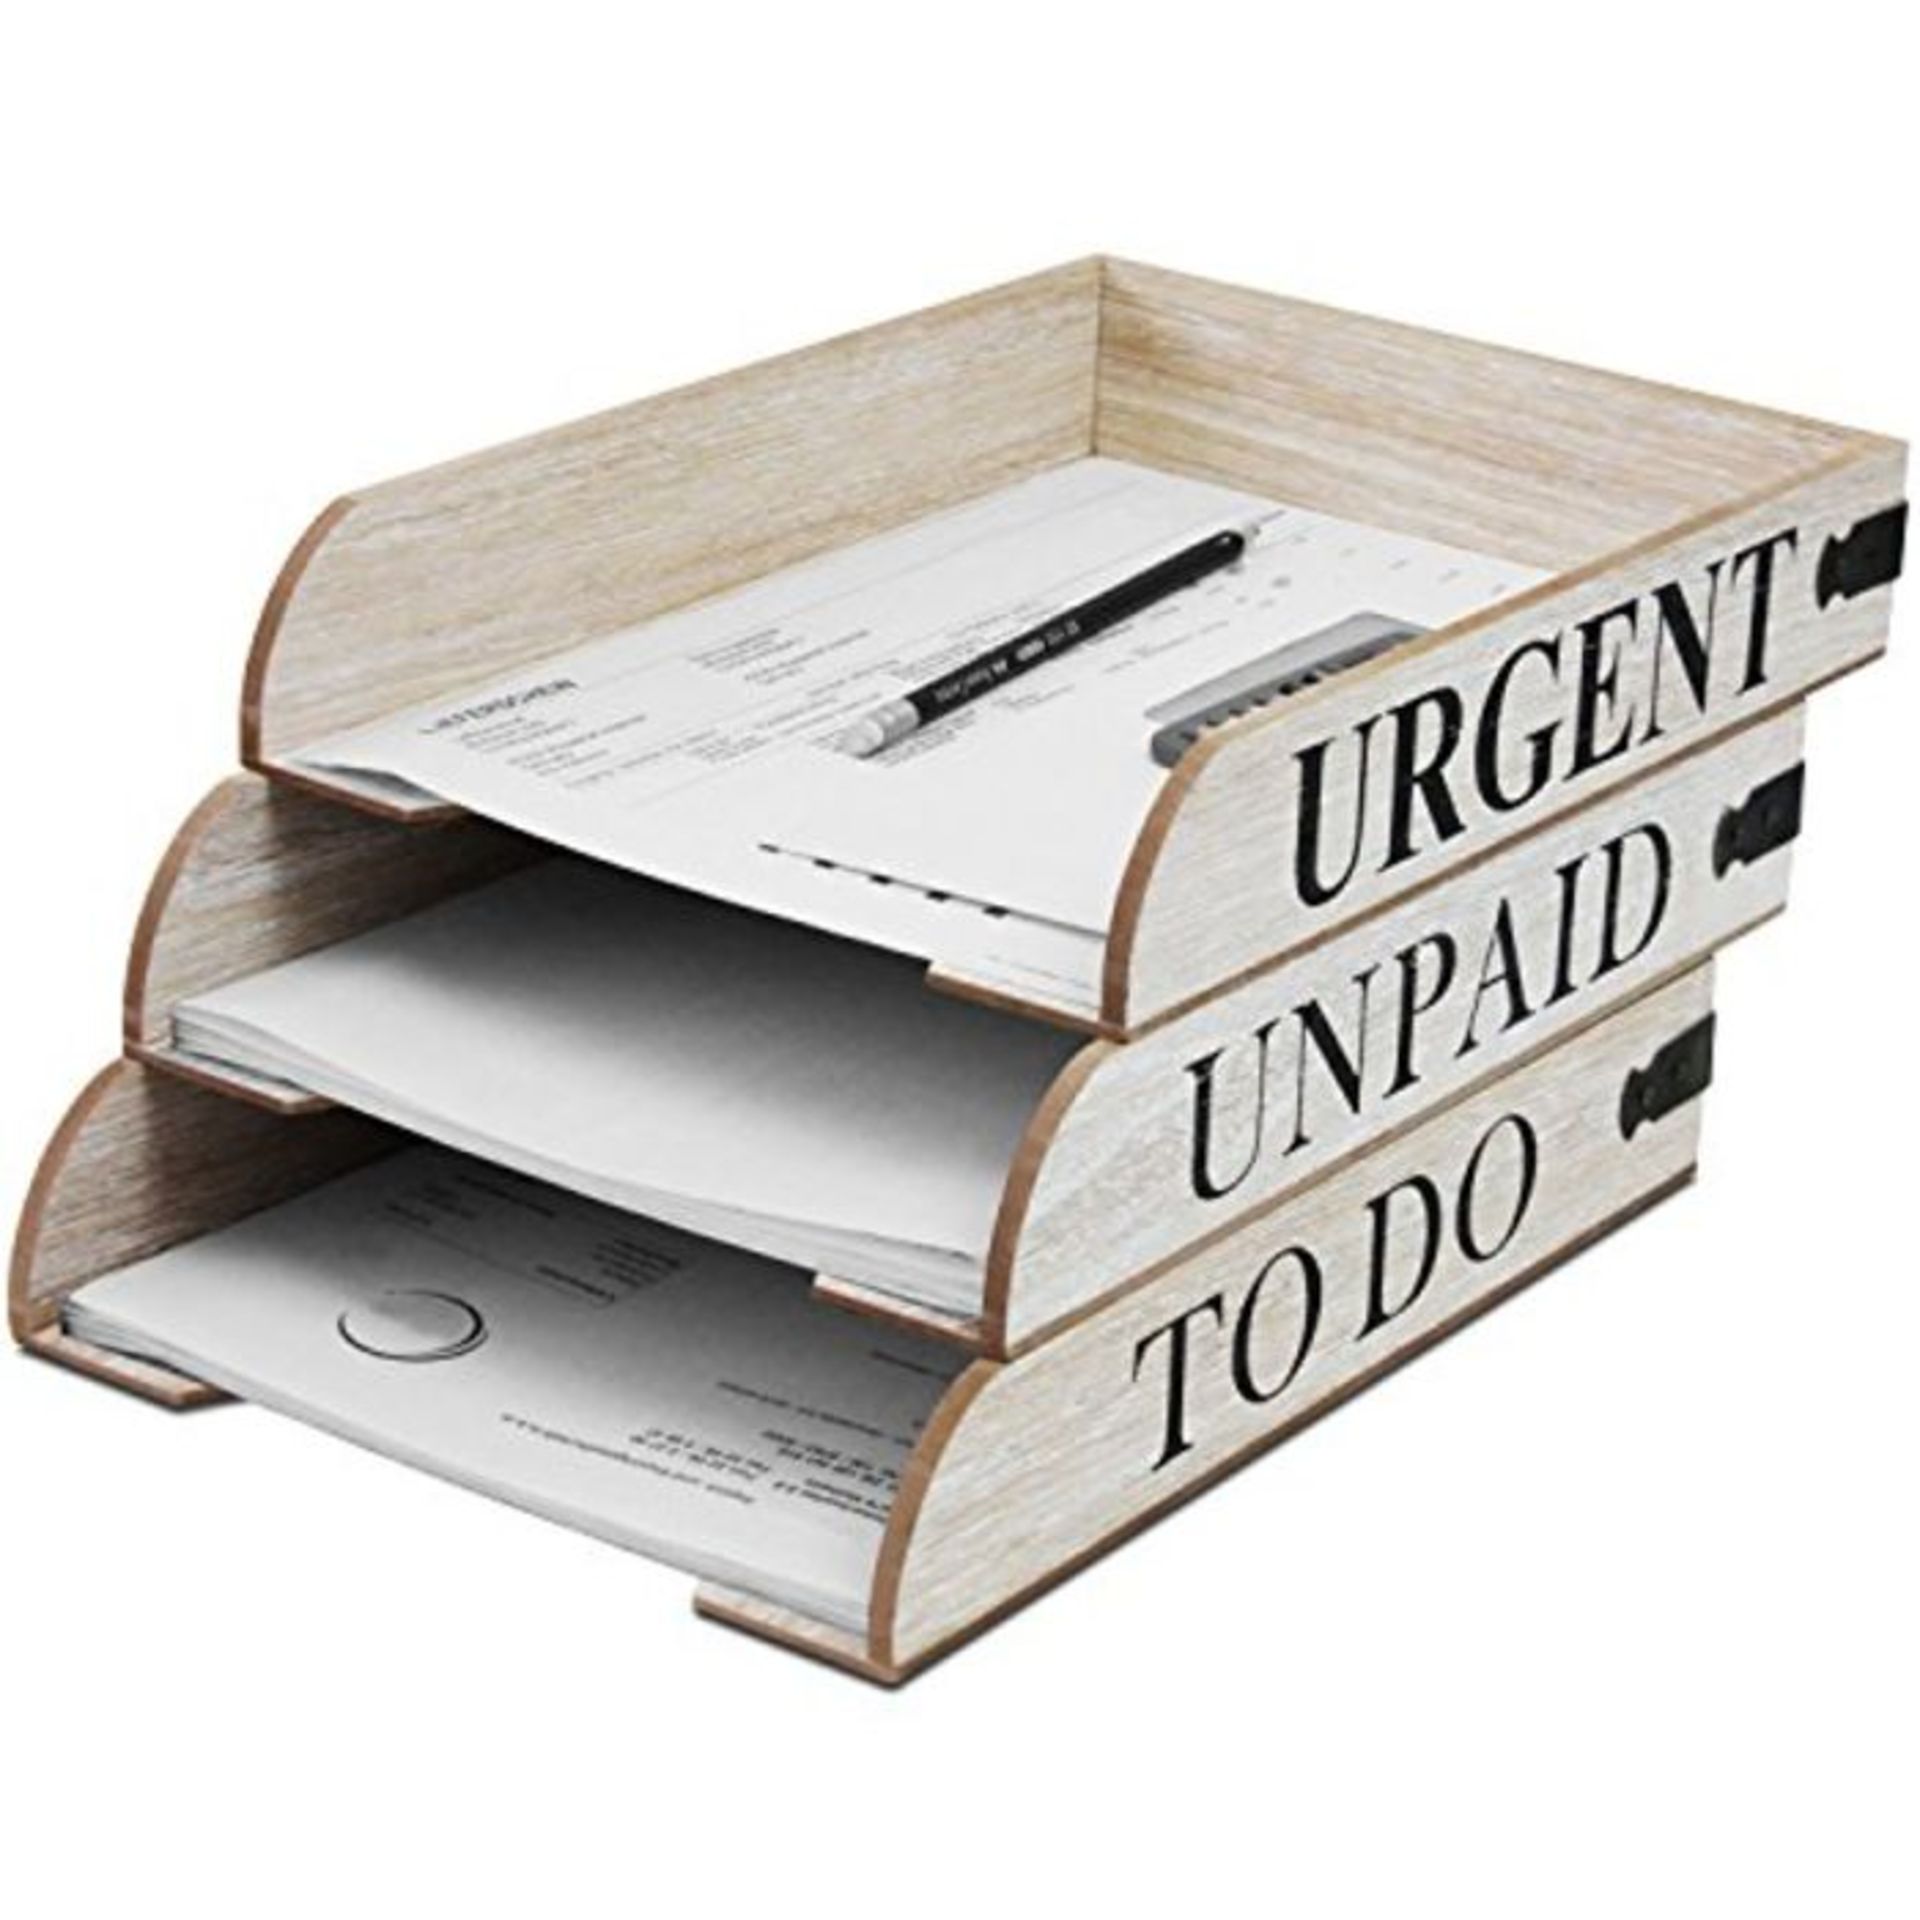 Set of 3 Wooden Storage Trays Mail in 3 Varieties, stackable Organiser Letter Trays Po